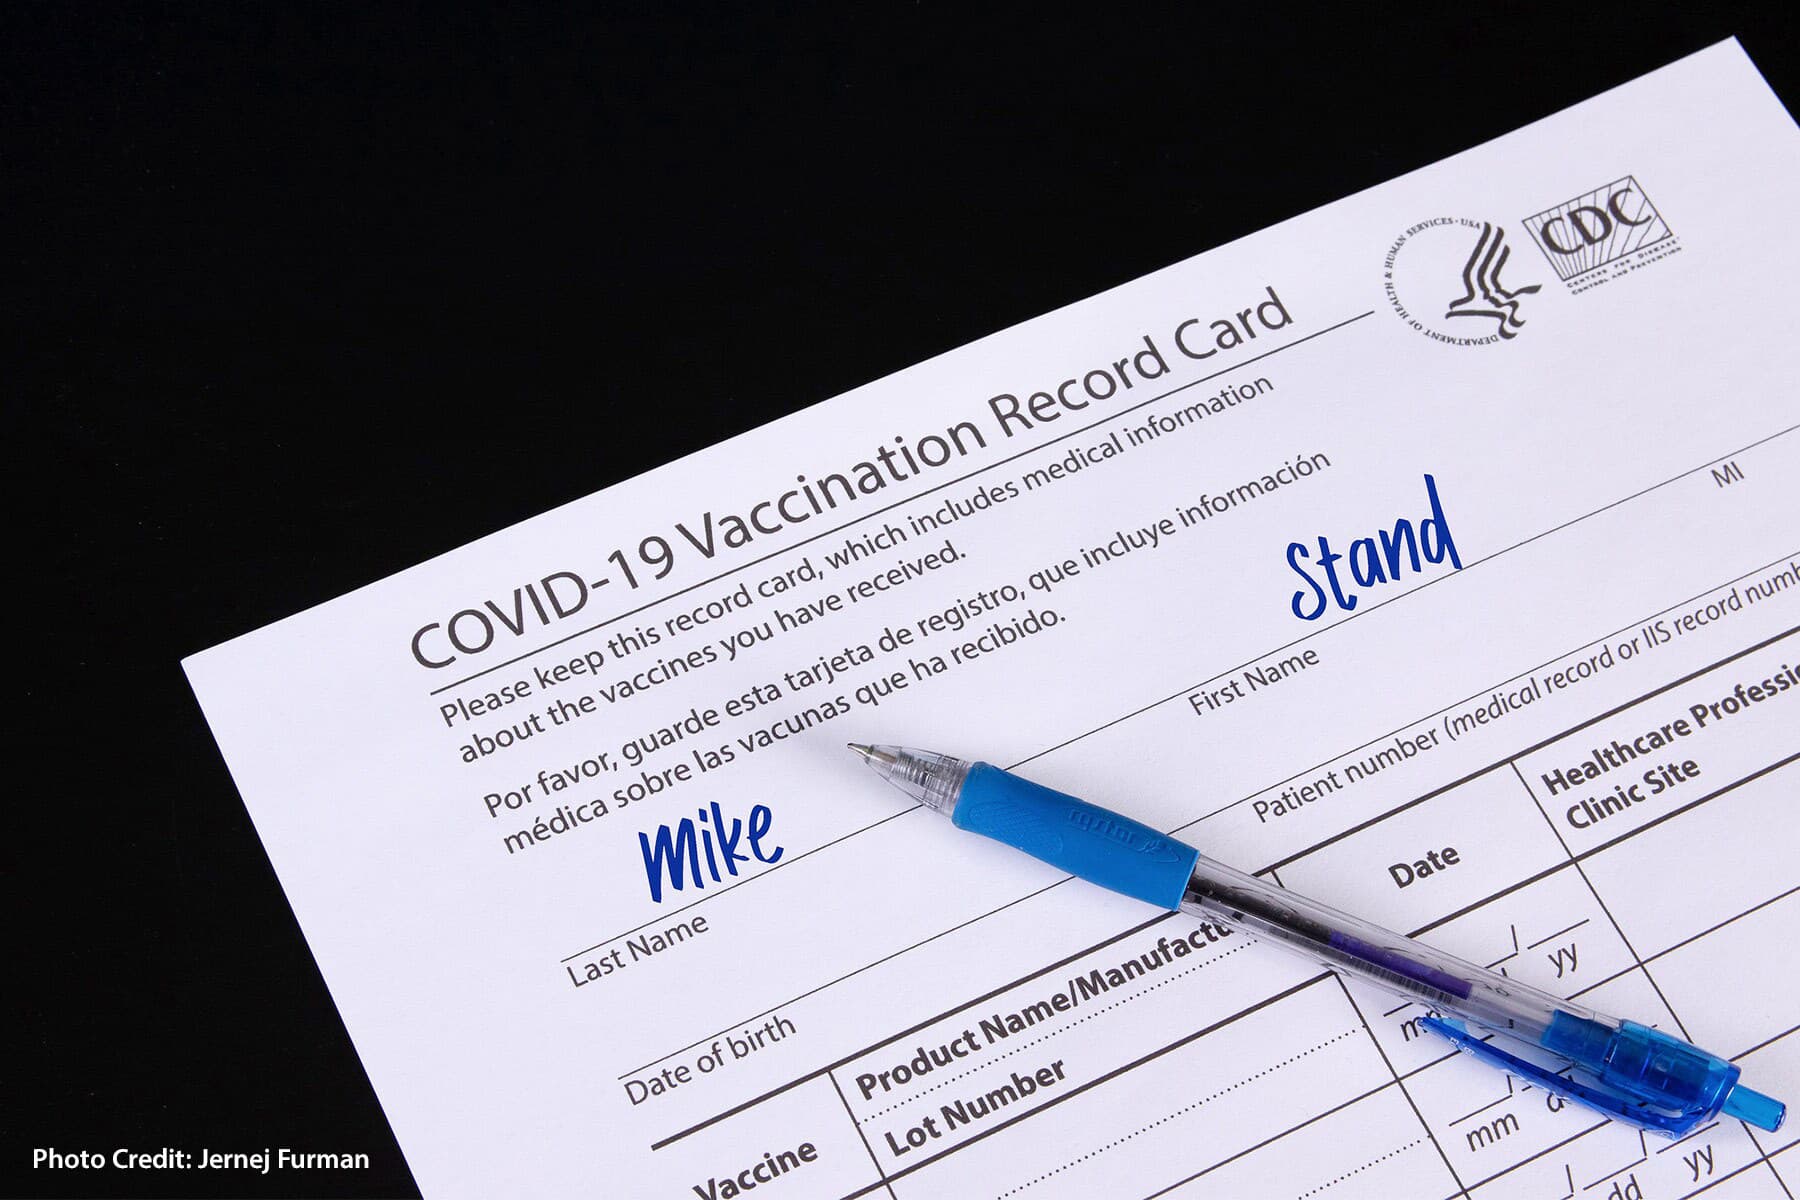 Two Women Charged in Fake COVID Vaccination Card Scam